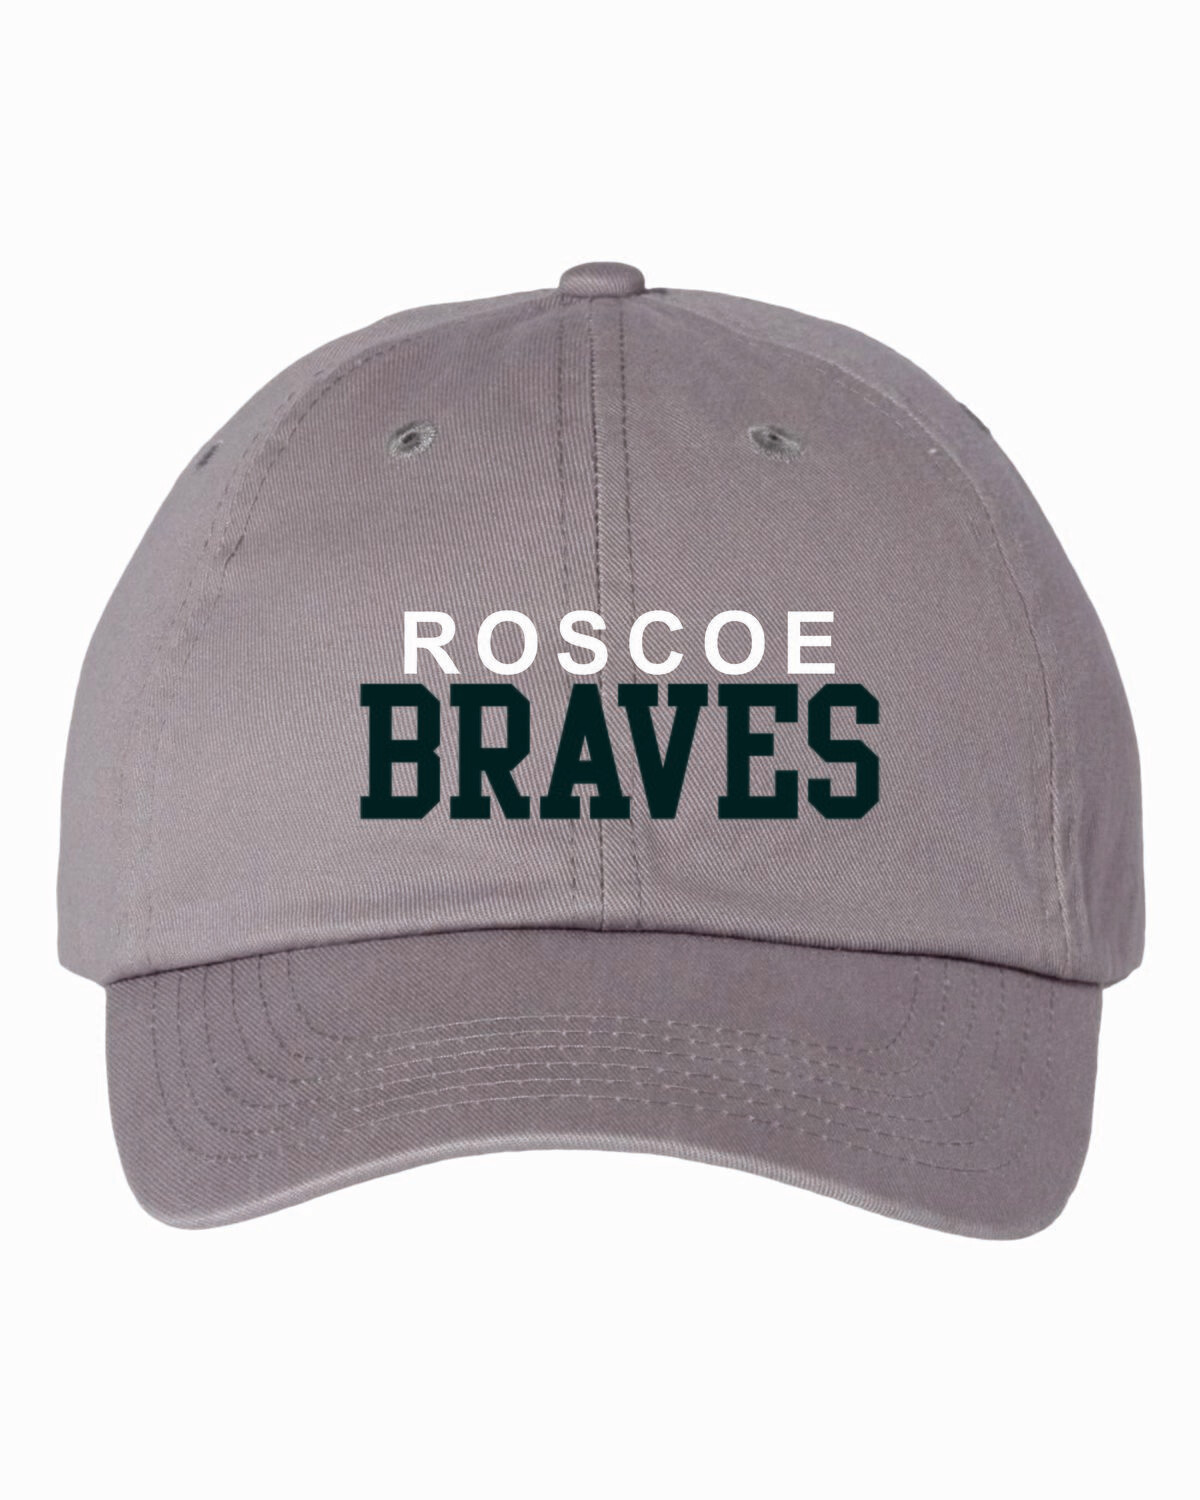 ROSCOE BRAVES Adjustable Cap, Embroidered, 4 Colors Available